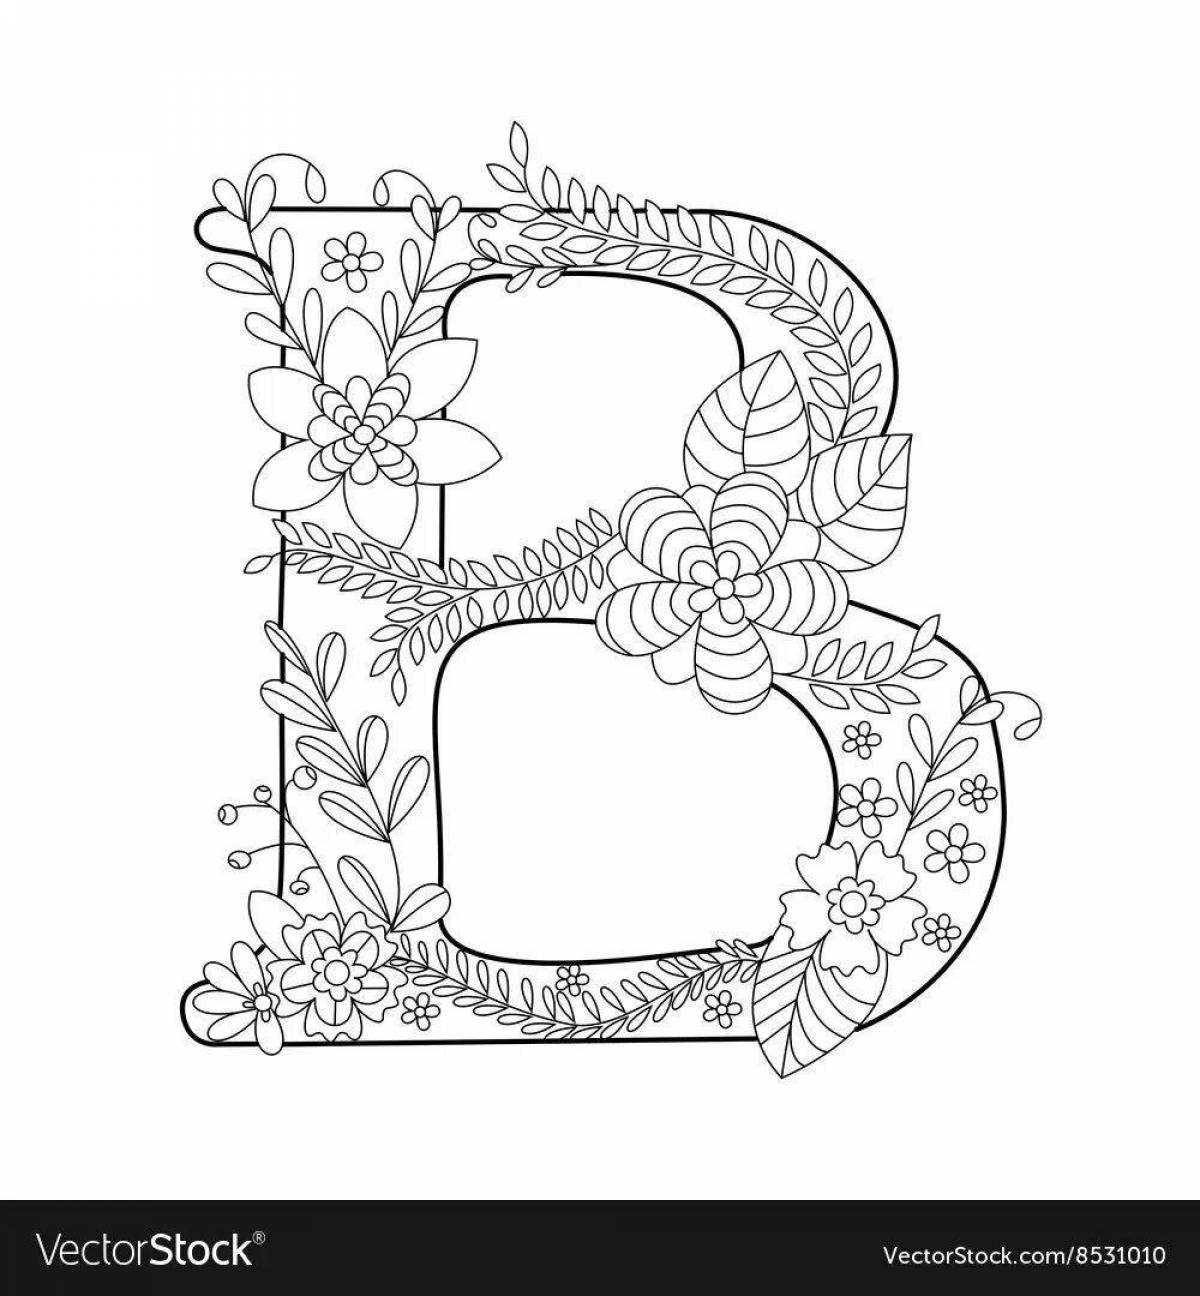 Glossy letter in invitation coloring book